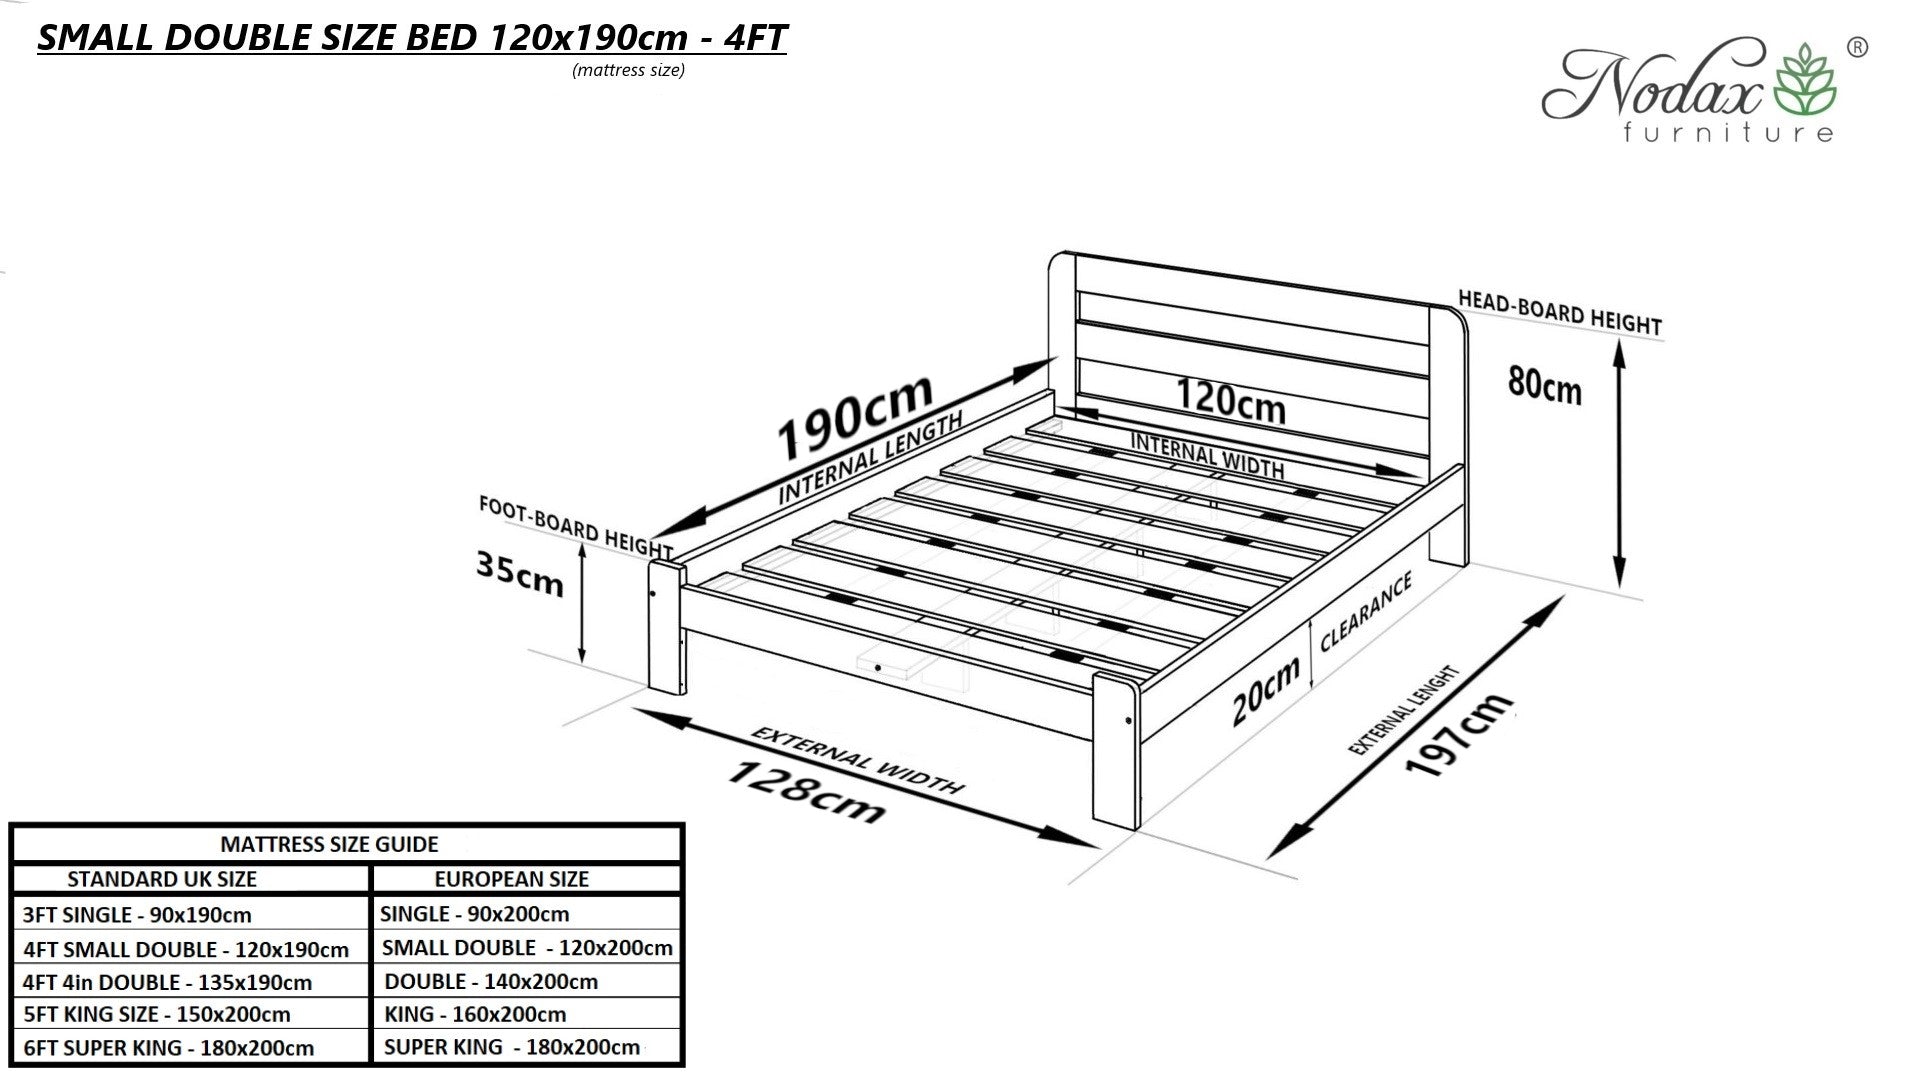 Wooden-bed-online-dimensions-4ft